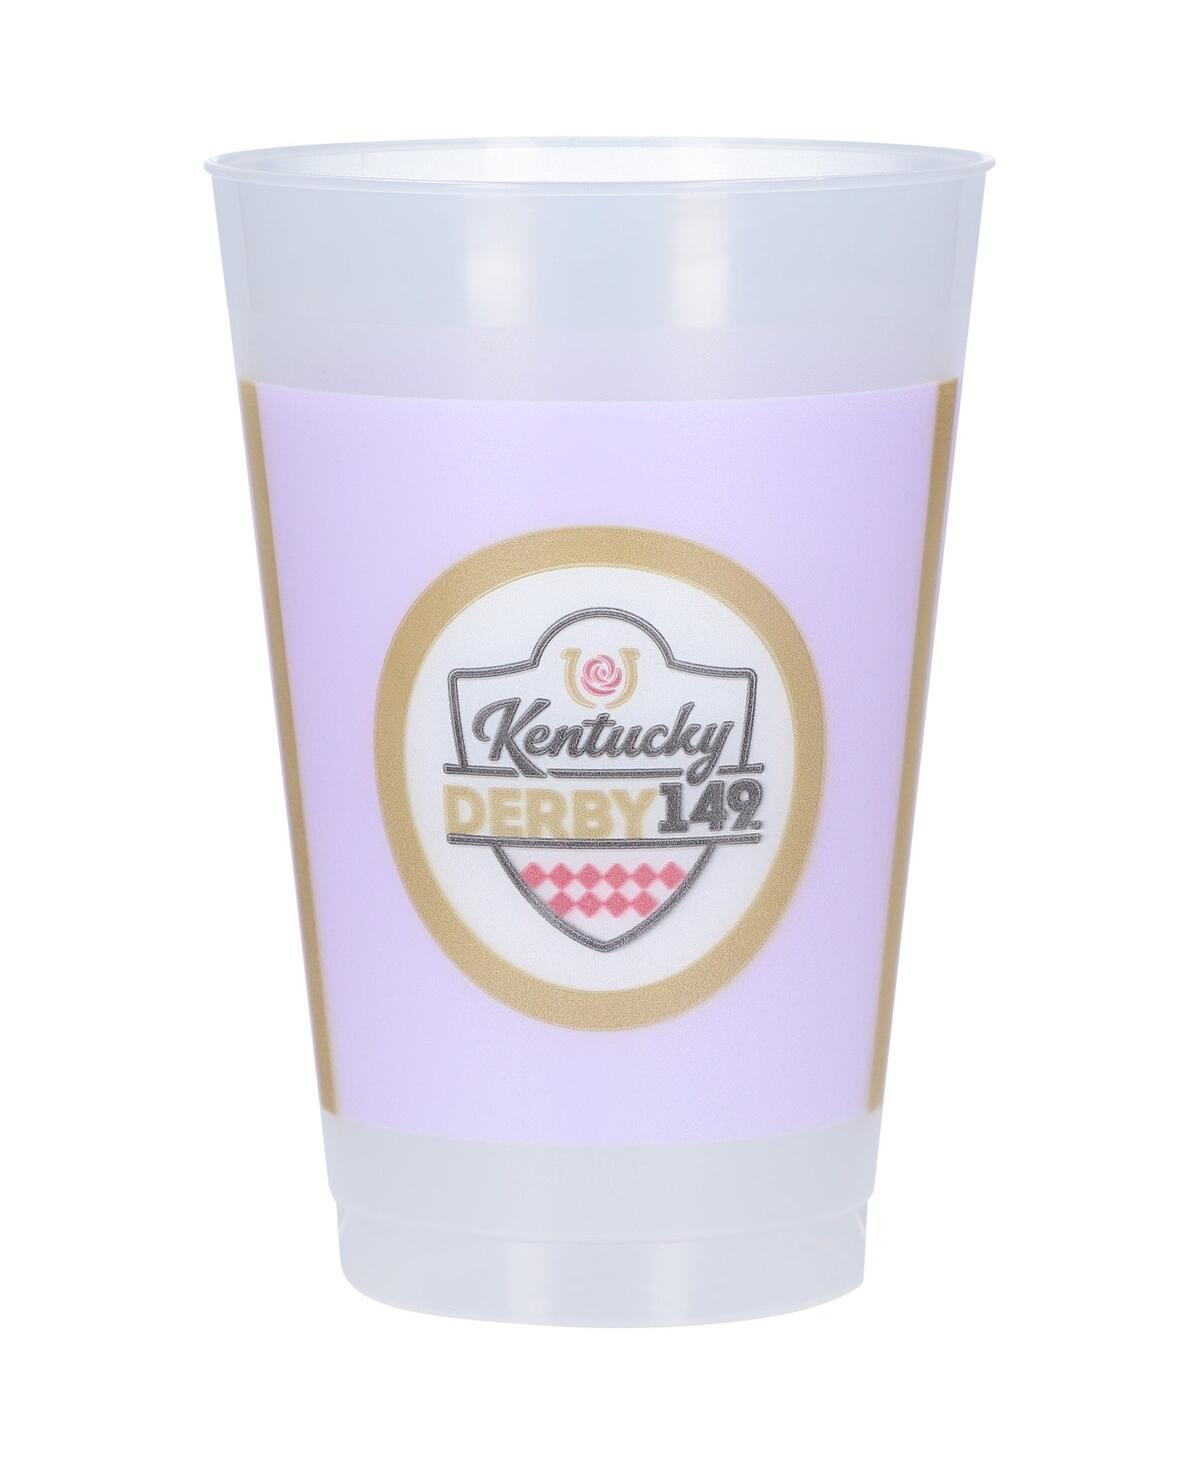 Westrick Paper Company Kentucky Derby 149 10-pack 14 oz Frosted Cup Set In White